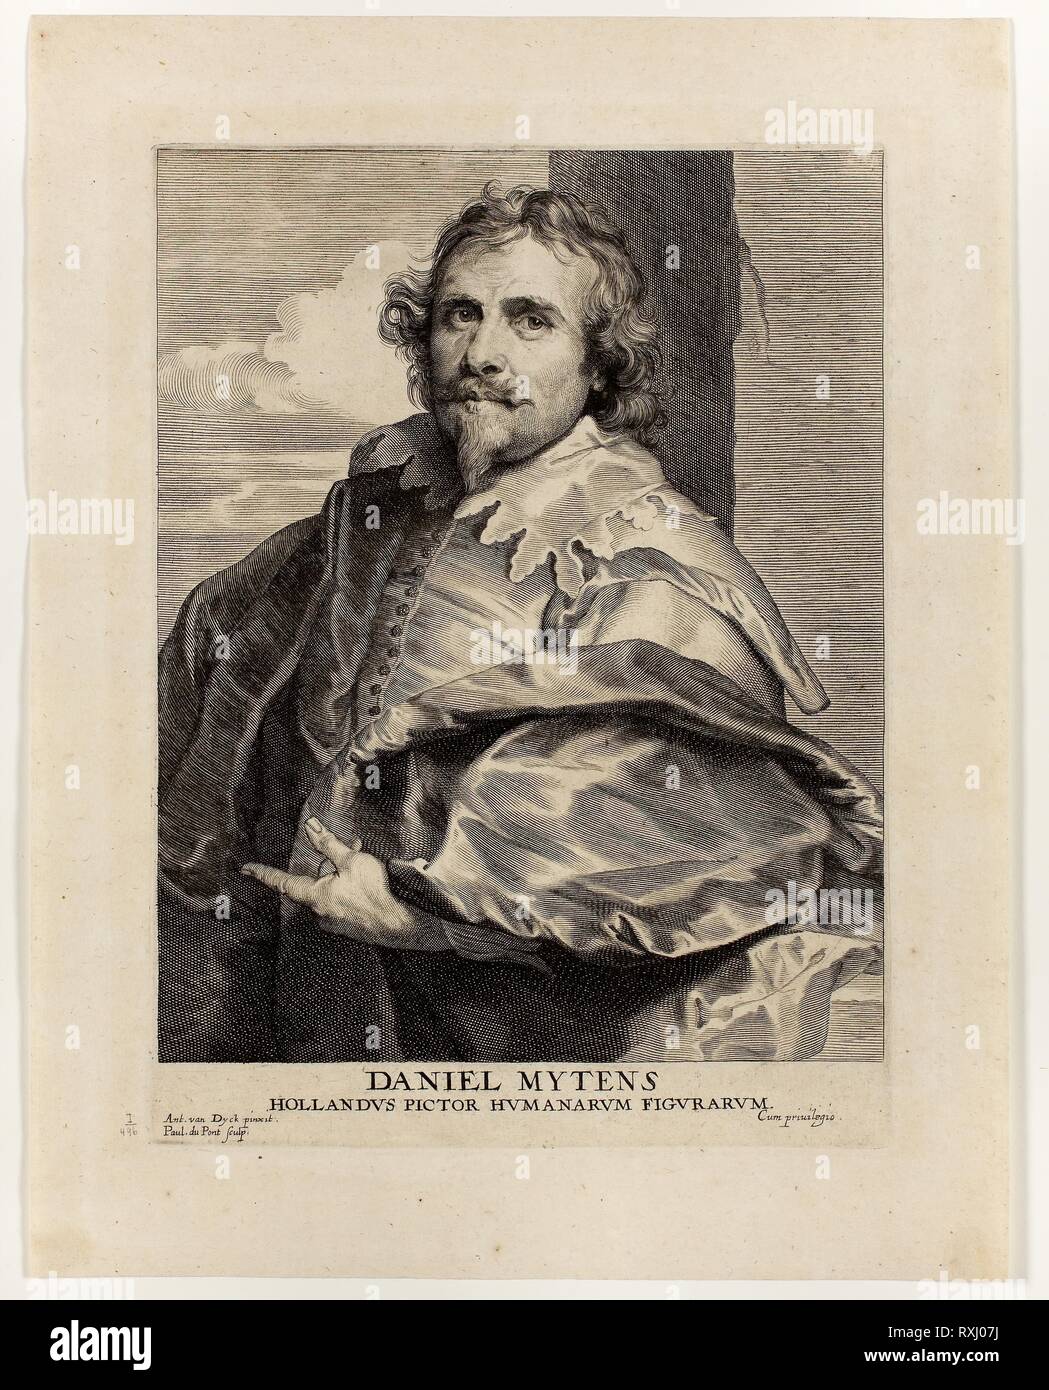 Daniel Mytens. Paul Pontius (Flemish, 1603-1658); after Anthony van Dyck (Flemish, 1599-1641). Date: 1630-1645. Dimensions: 249 x 185 mm (plate); 313 x 243 mm (sheet). Engraving in black on cream laid paper. Origin: Flanders. Museum: The Chicago Art Institute. Stock Photo